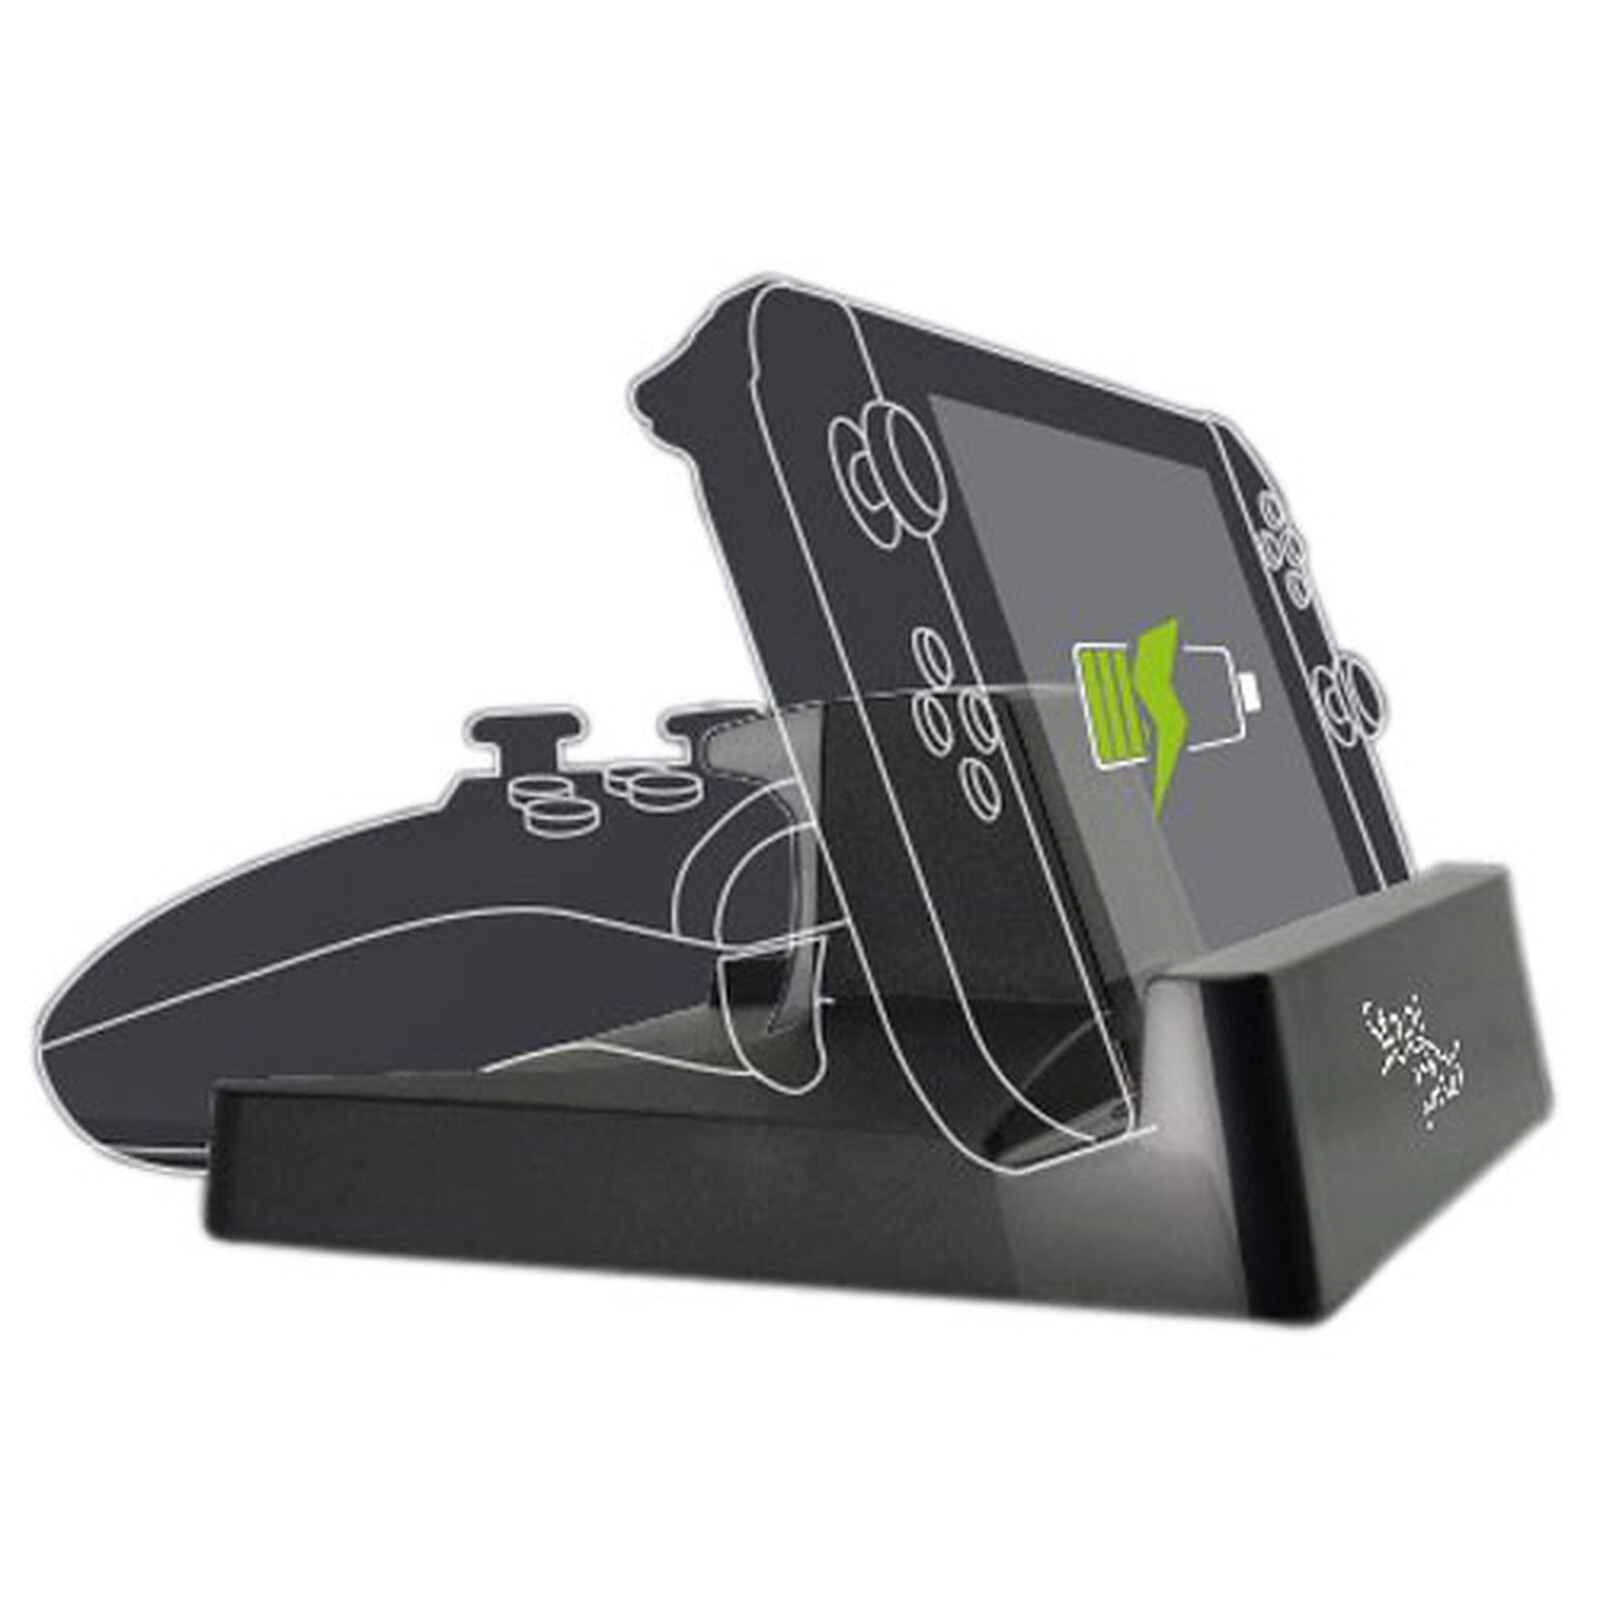 snakebyte - Support de charge pour manettes xbox one - Accessoires Xbox One  - LDLC